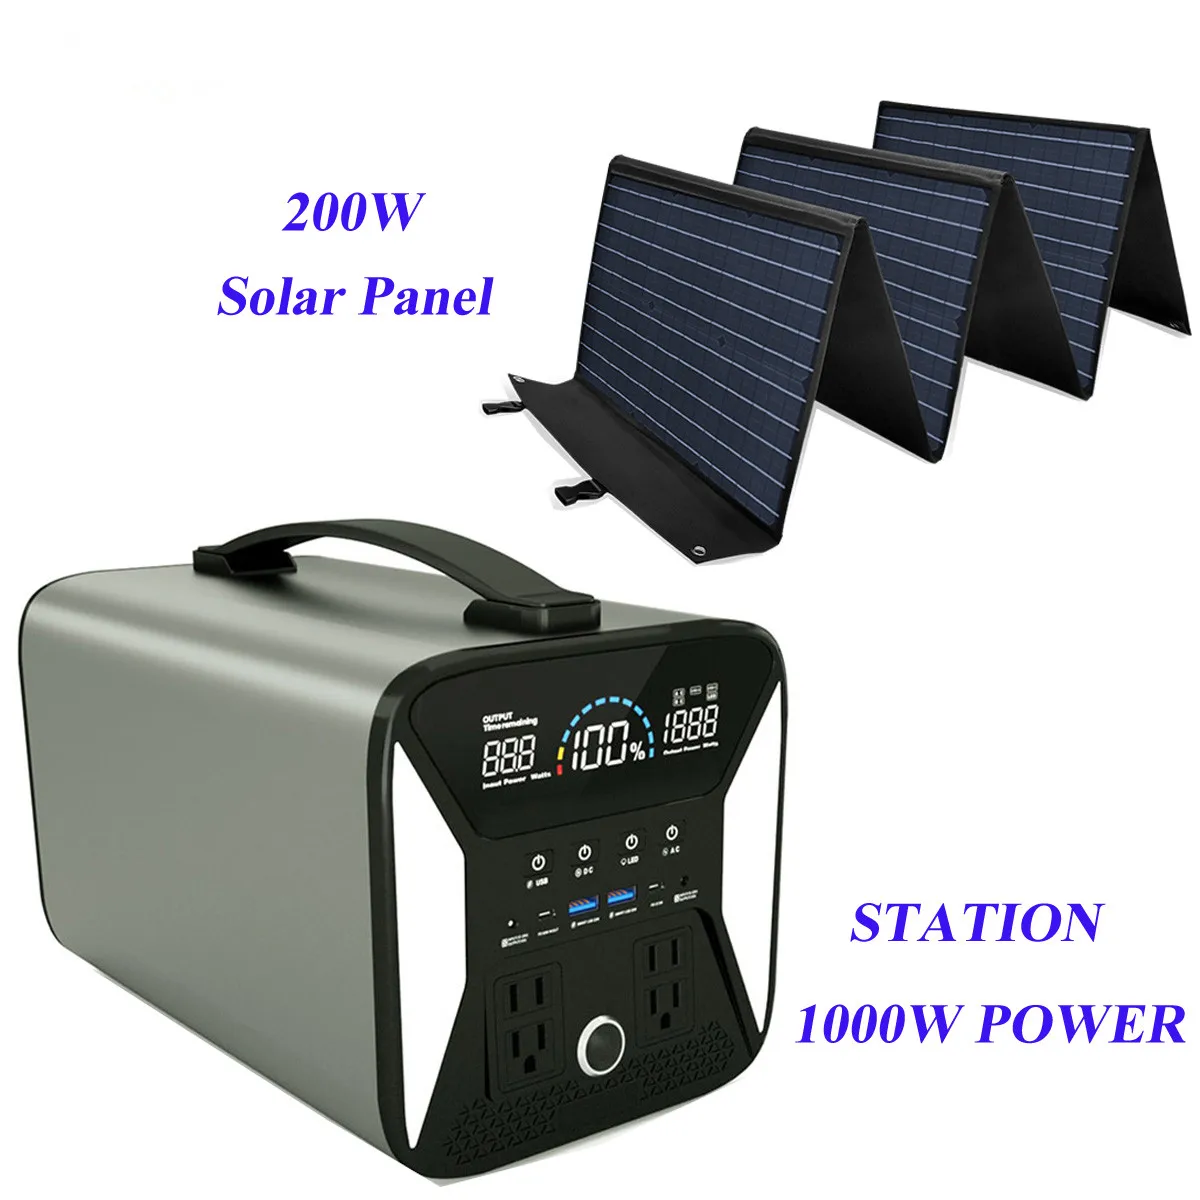 

1000W Lifepo4 Portable Solar Generator with 200W Solar Panel Extral Battery Power Station Camping Solar Energy Systems Complete